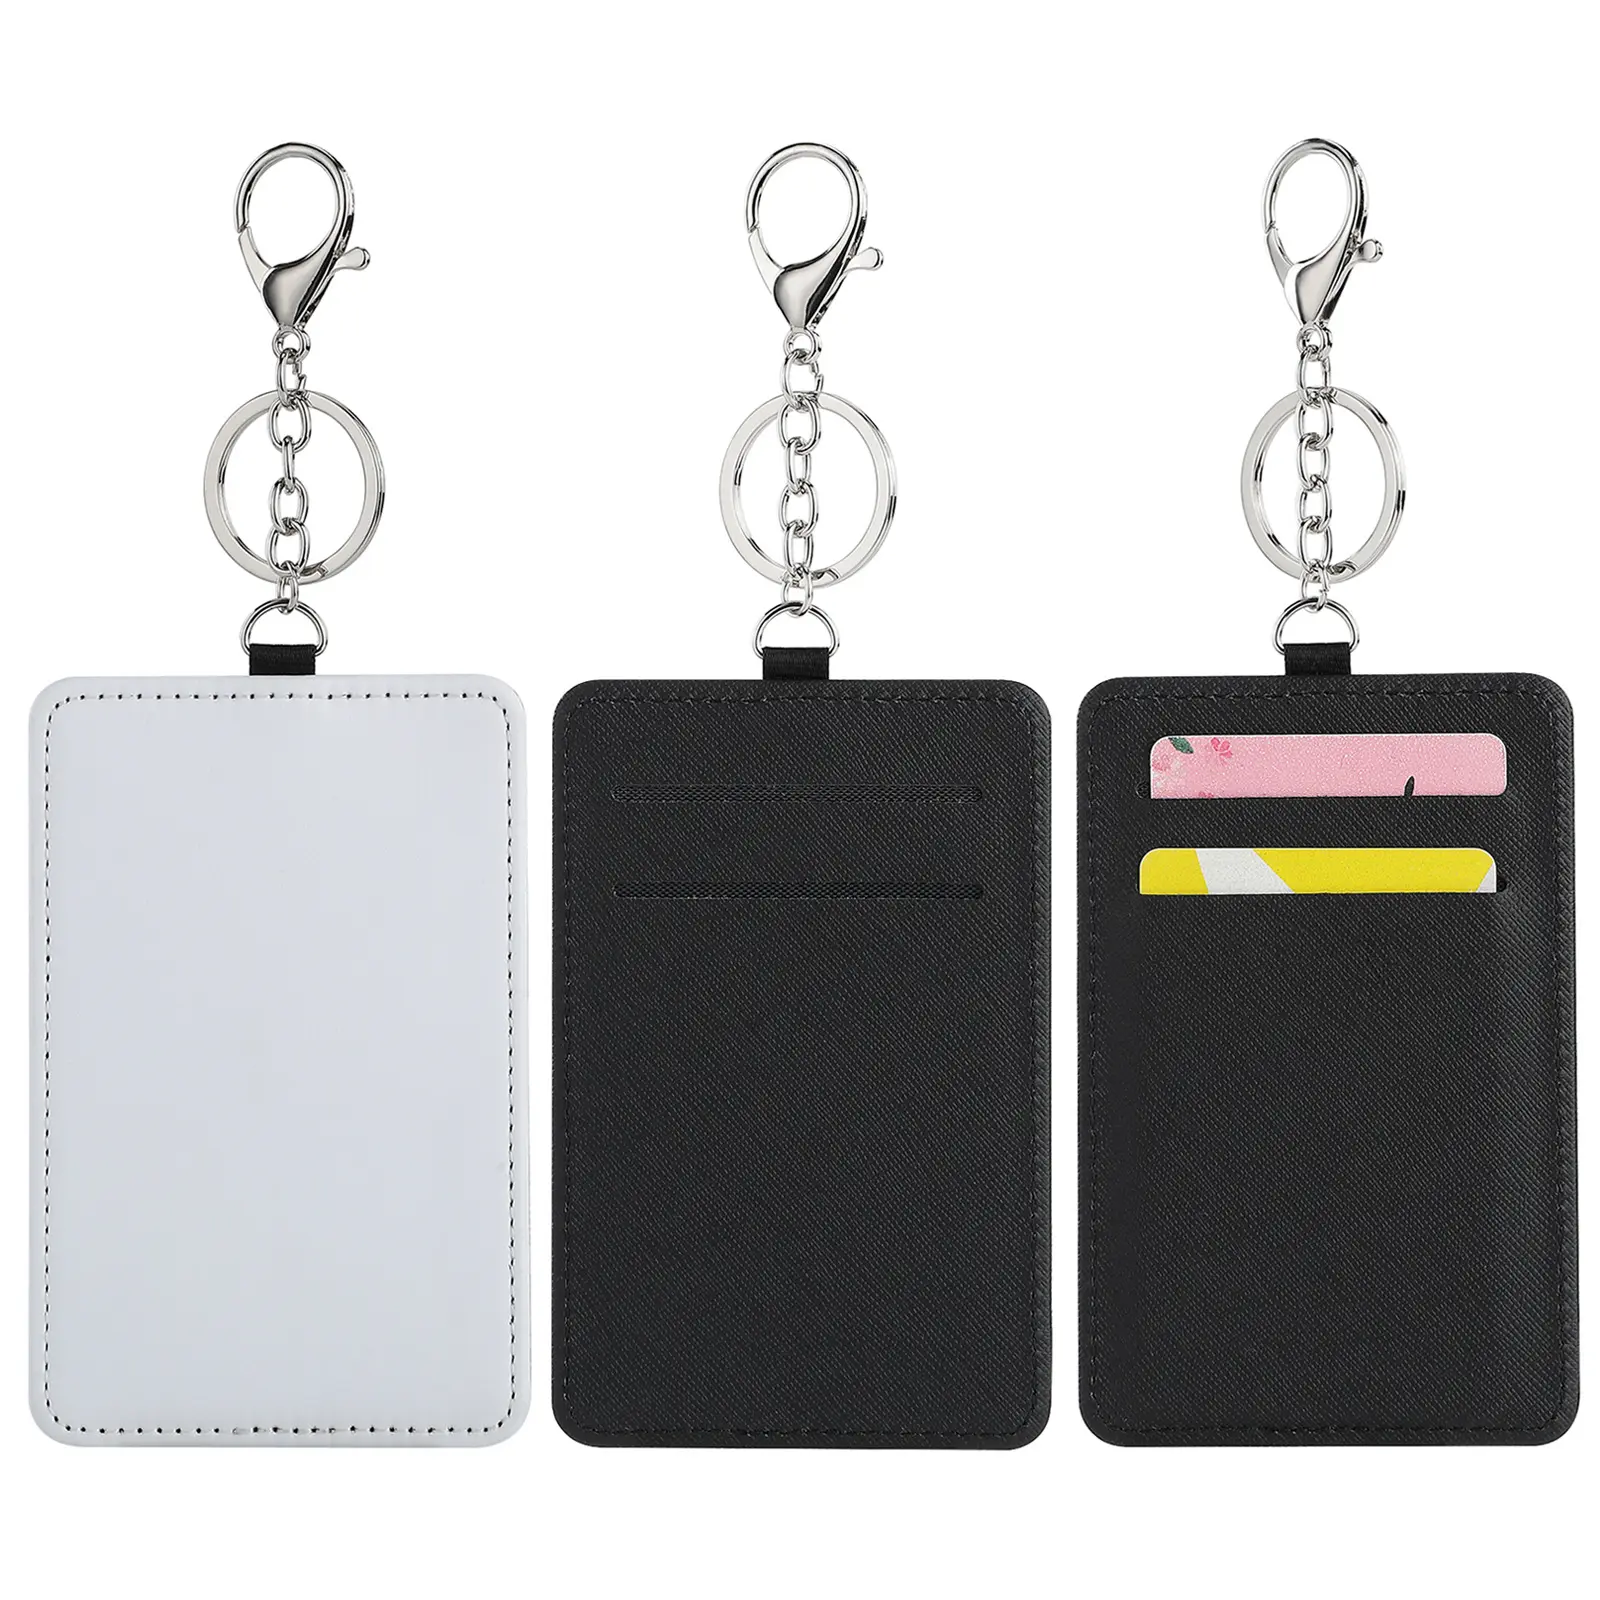 Sublimation Heat press Credit Card Holder Wallet Case Pouch 19.5*7.5cm Blank PU Leather Keychain card Holder